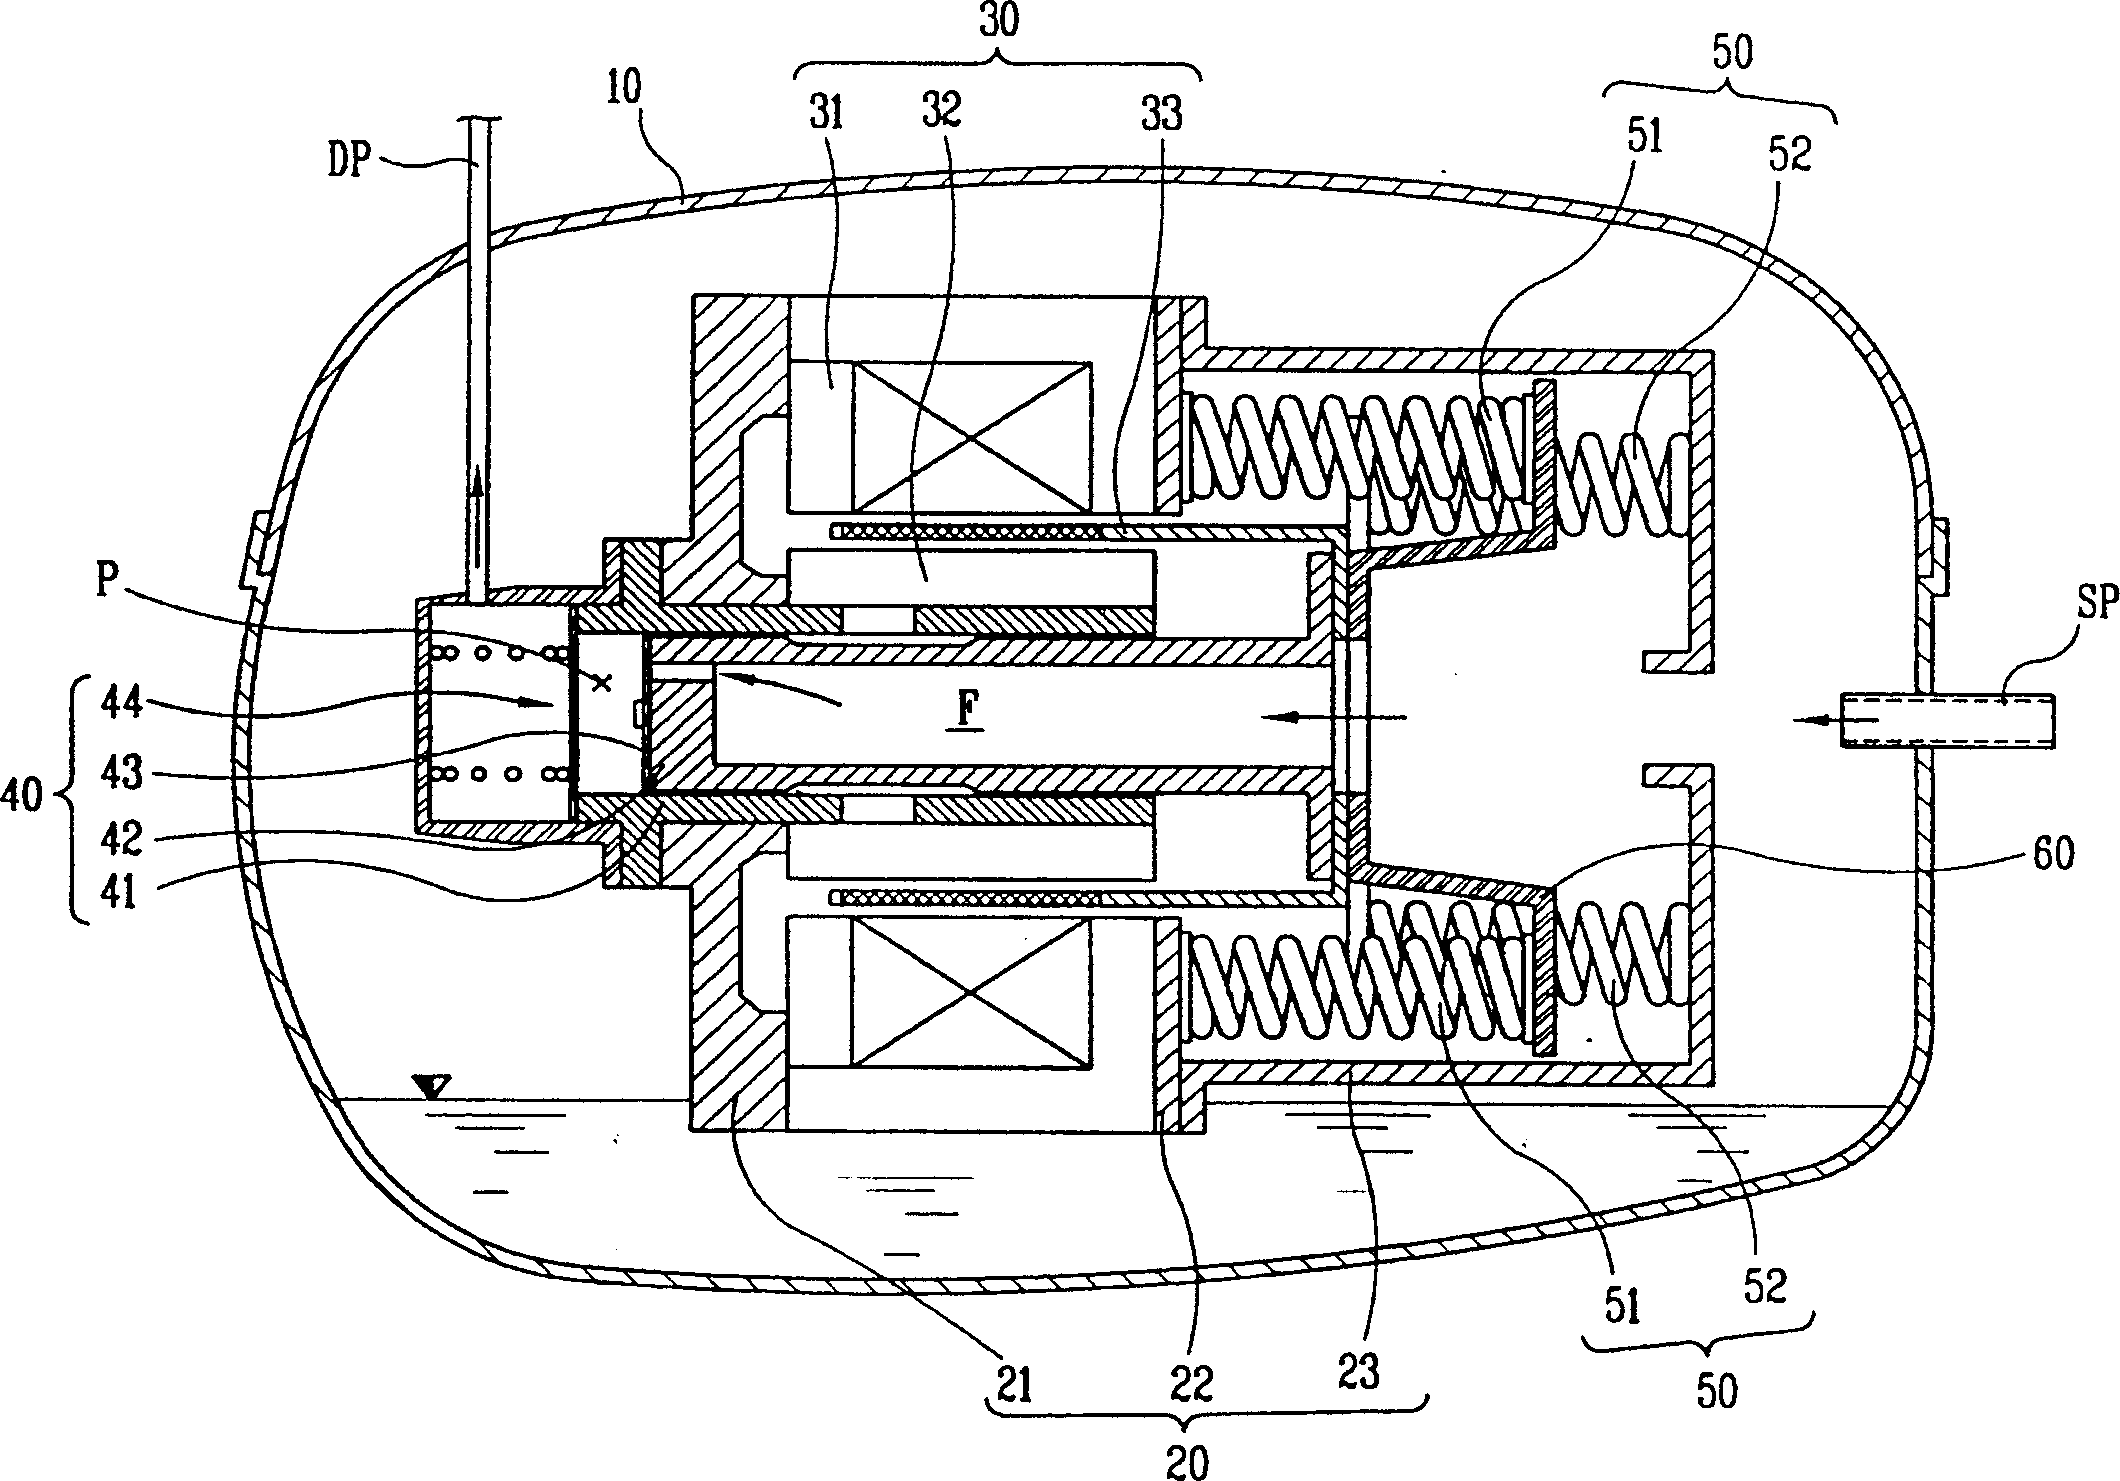 Resonant spring support structure for reciprocating compressor